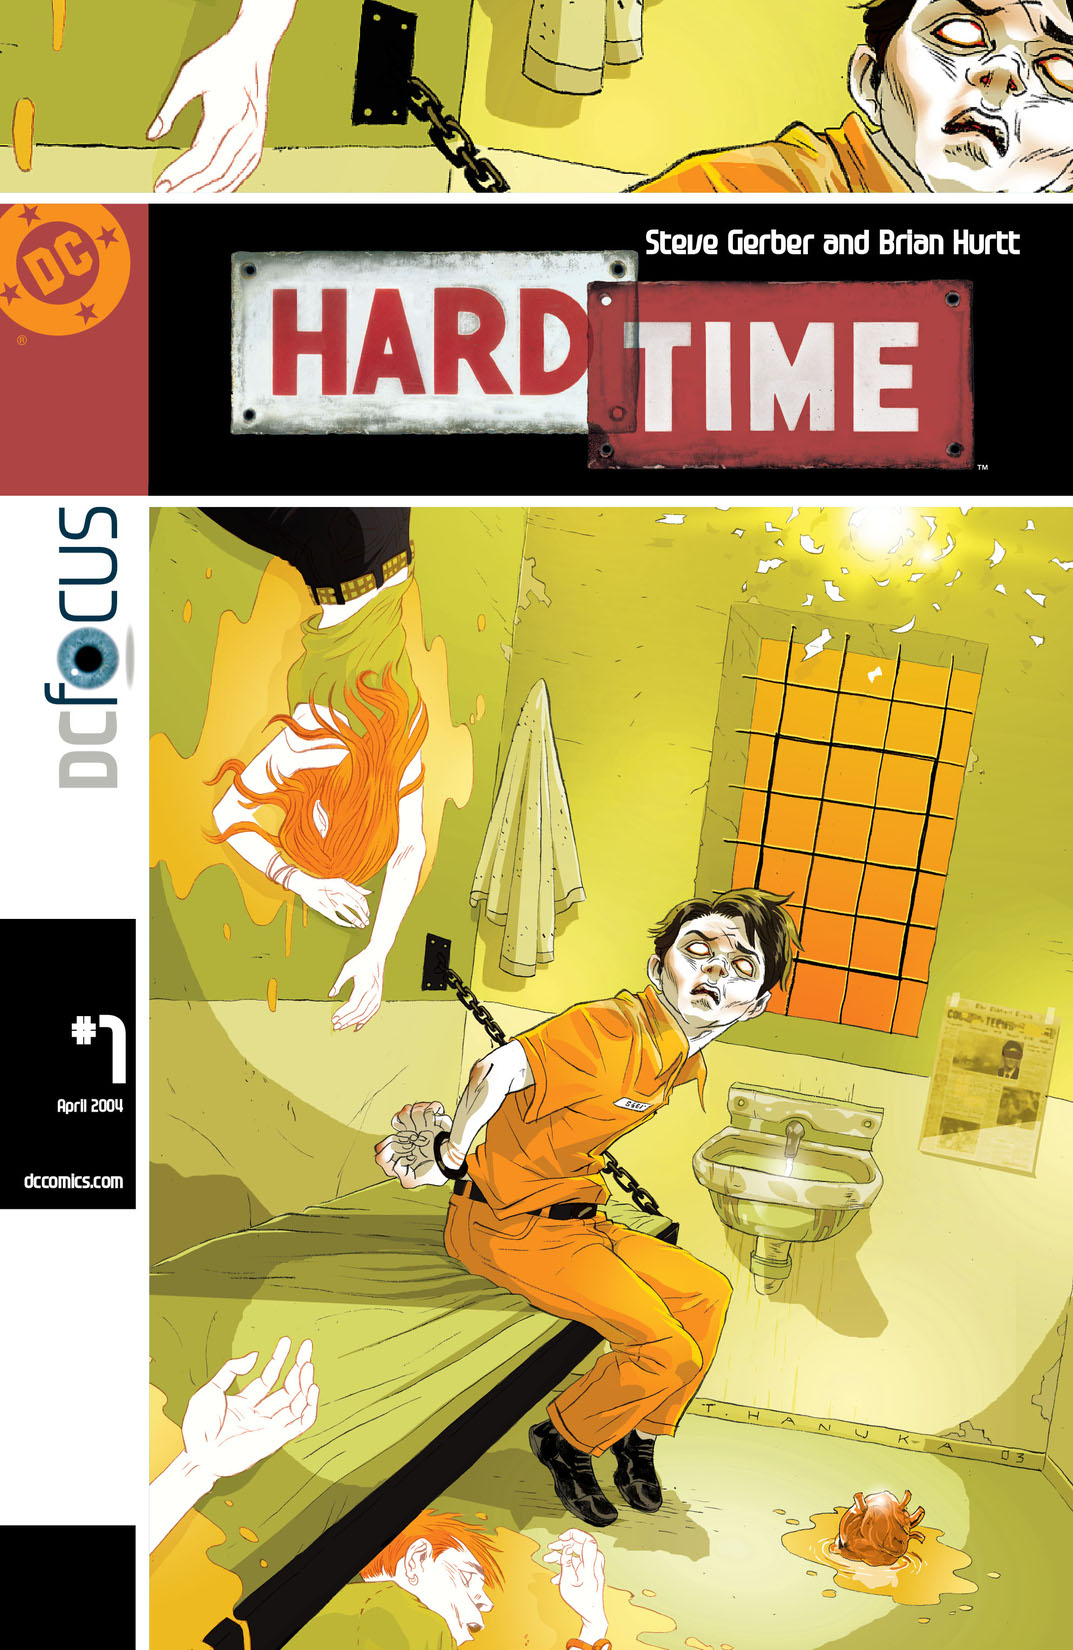 Hard Time #1 preview images